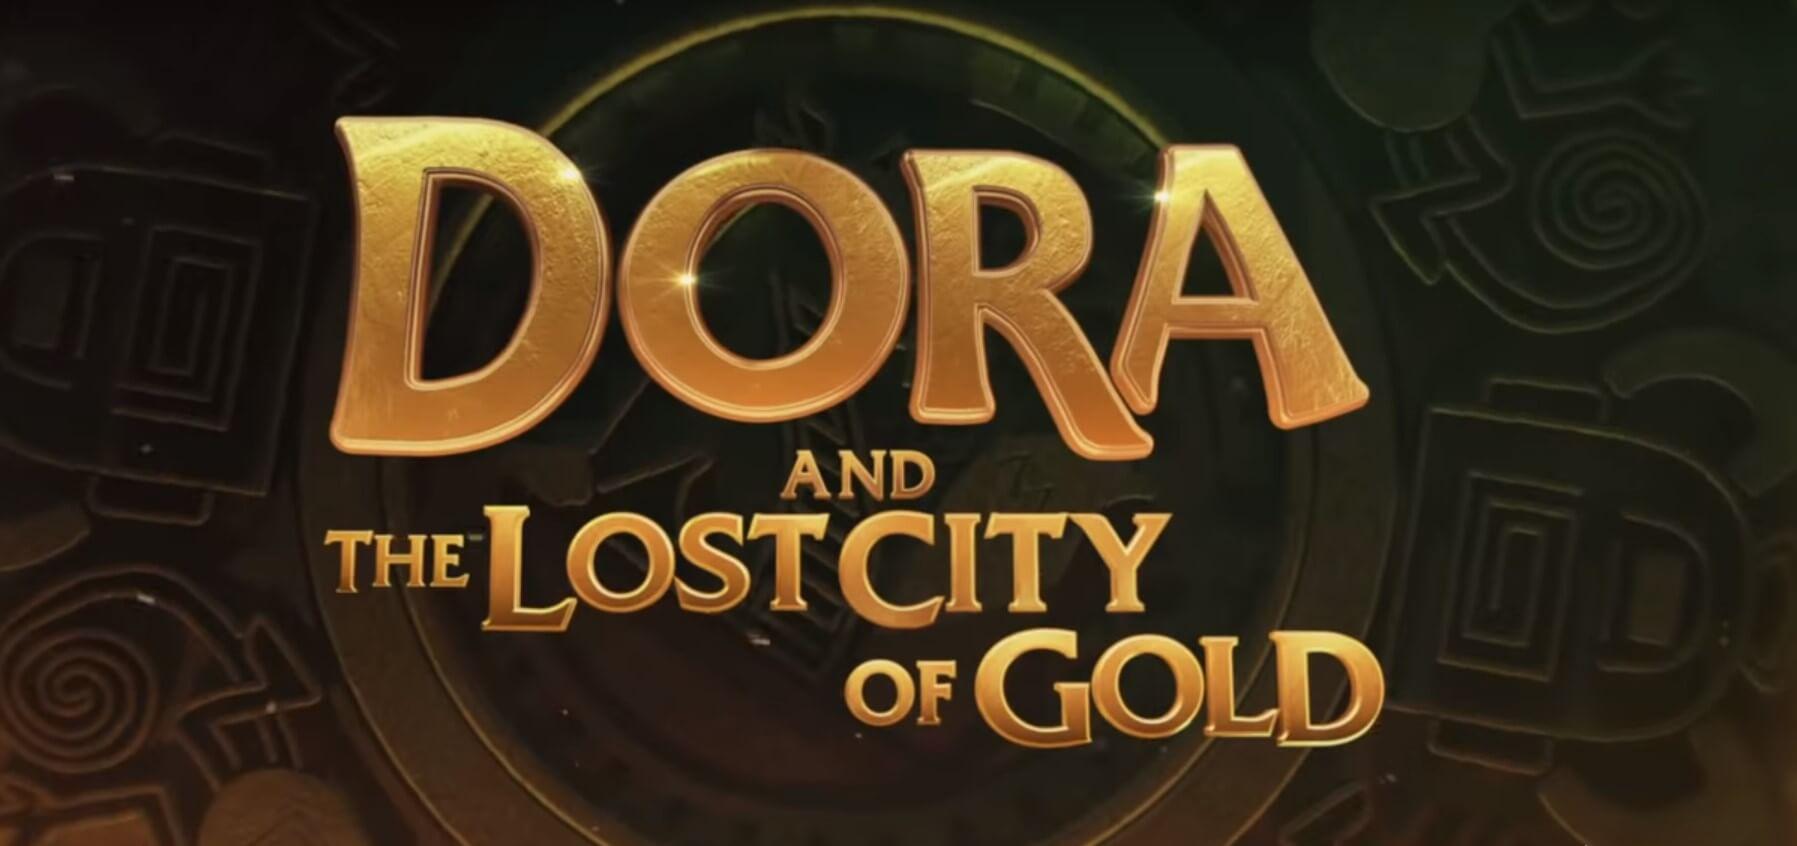 Dora and the Lost City of Gold Movie (2019). Cast. Teaser